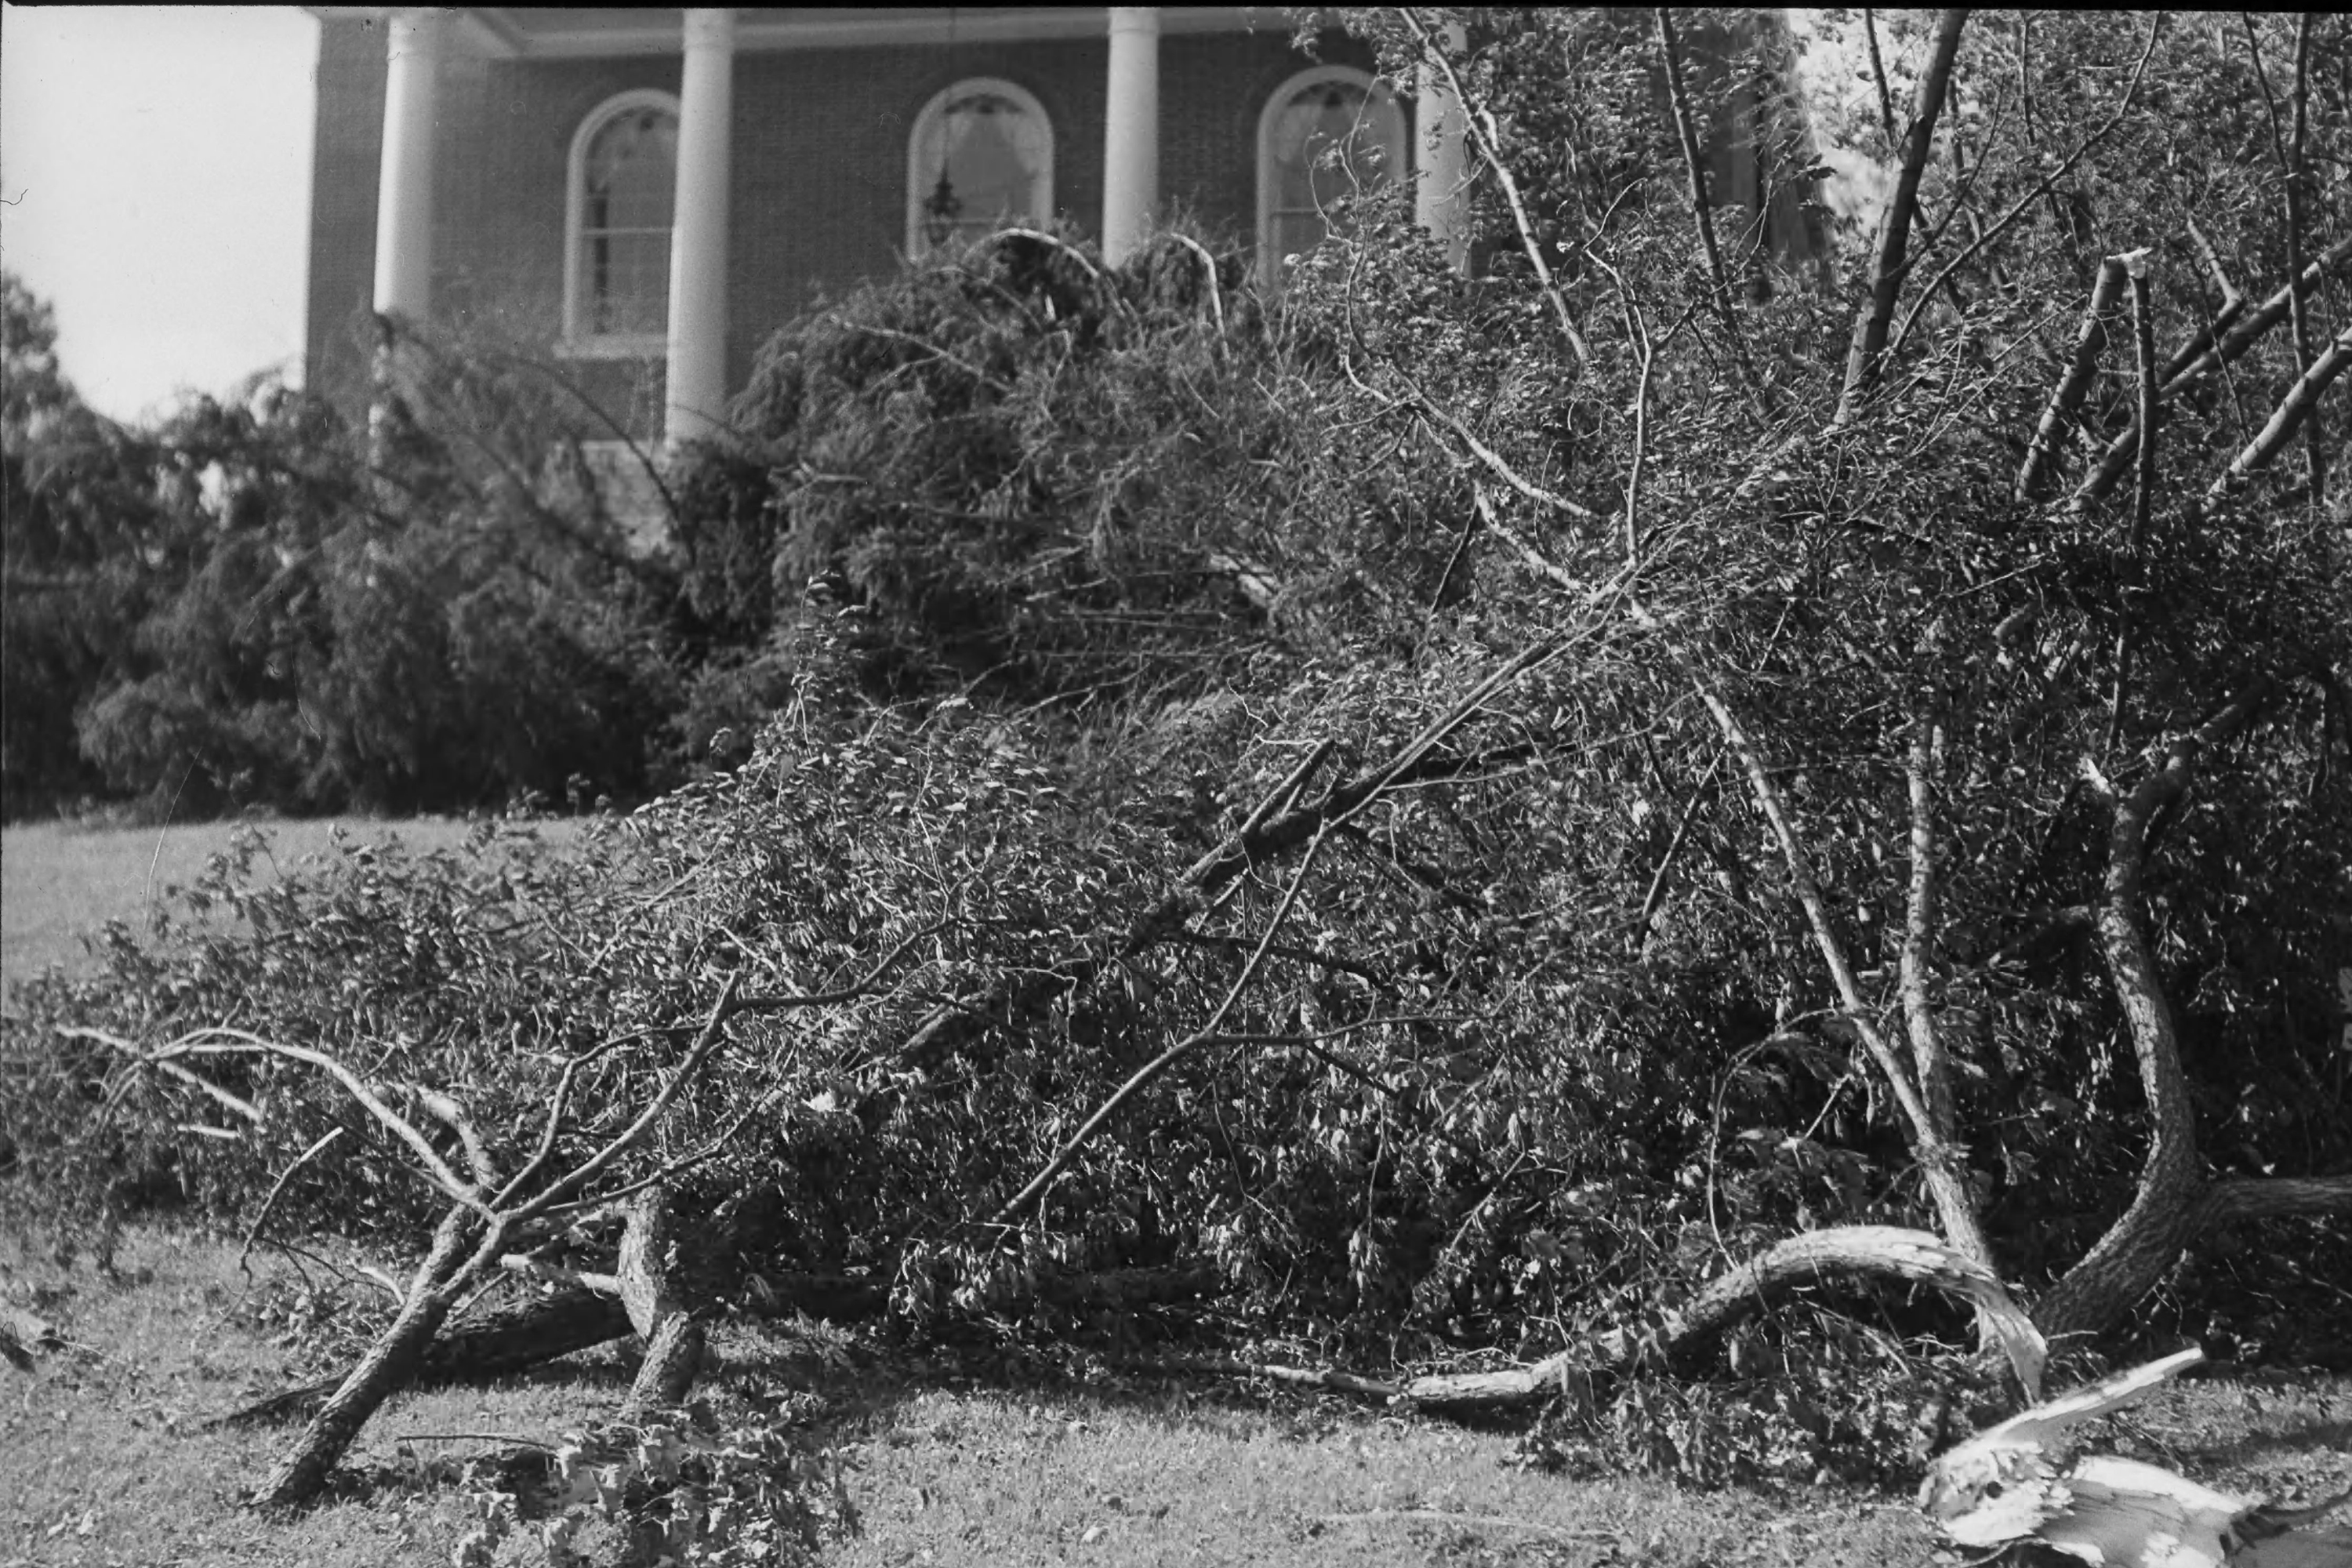 Nearly 80 years ago, students returning to Storrs for the start of classes found a campus with no electricity, phones, or water, and hundreds of trees blocking roads and walkways. (Jerauld Manter Photo/Archives & Special Collections, UConn Library)